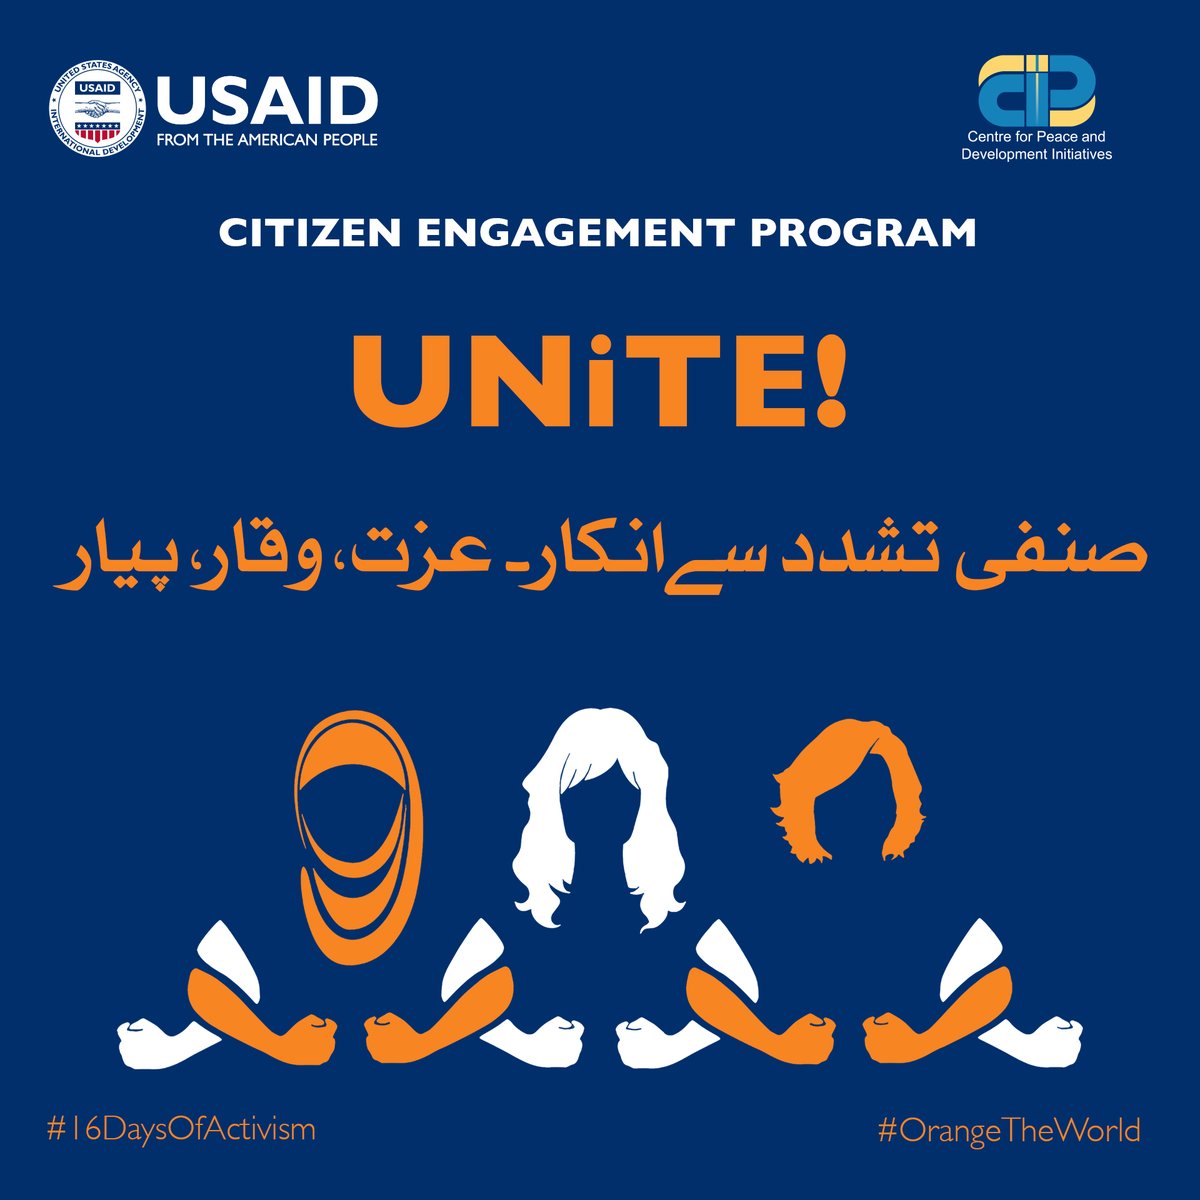 Raise your voice, say no to domestic violence! Unite for respect, dignity, and love in every home. Together, let's create a world where everyone feels safe and valued. 🤝 #USAID4Impact #Change4Impact #Unite4Impact #Act4Impact #EndDomesticViolence #OrangeTheWorld